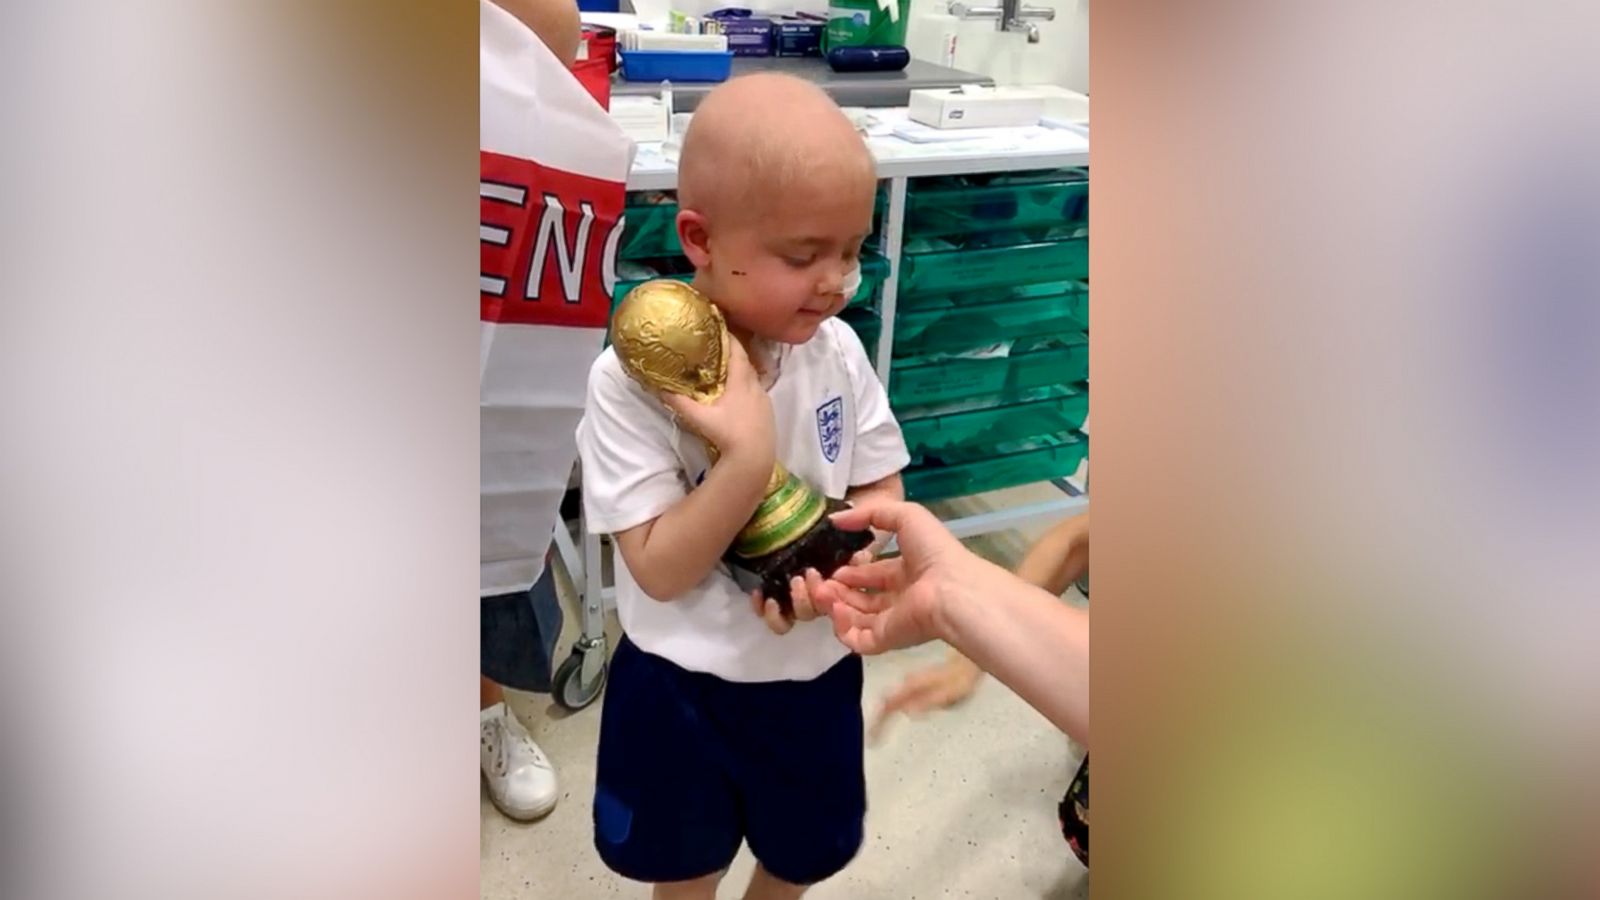 PHOTO: Ben Williams, 5, finished six weeks of radiation when staff at the Queen Elizabeth Hospital Birmingham presented him with the trophy.